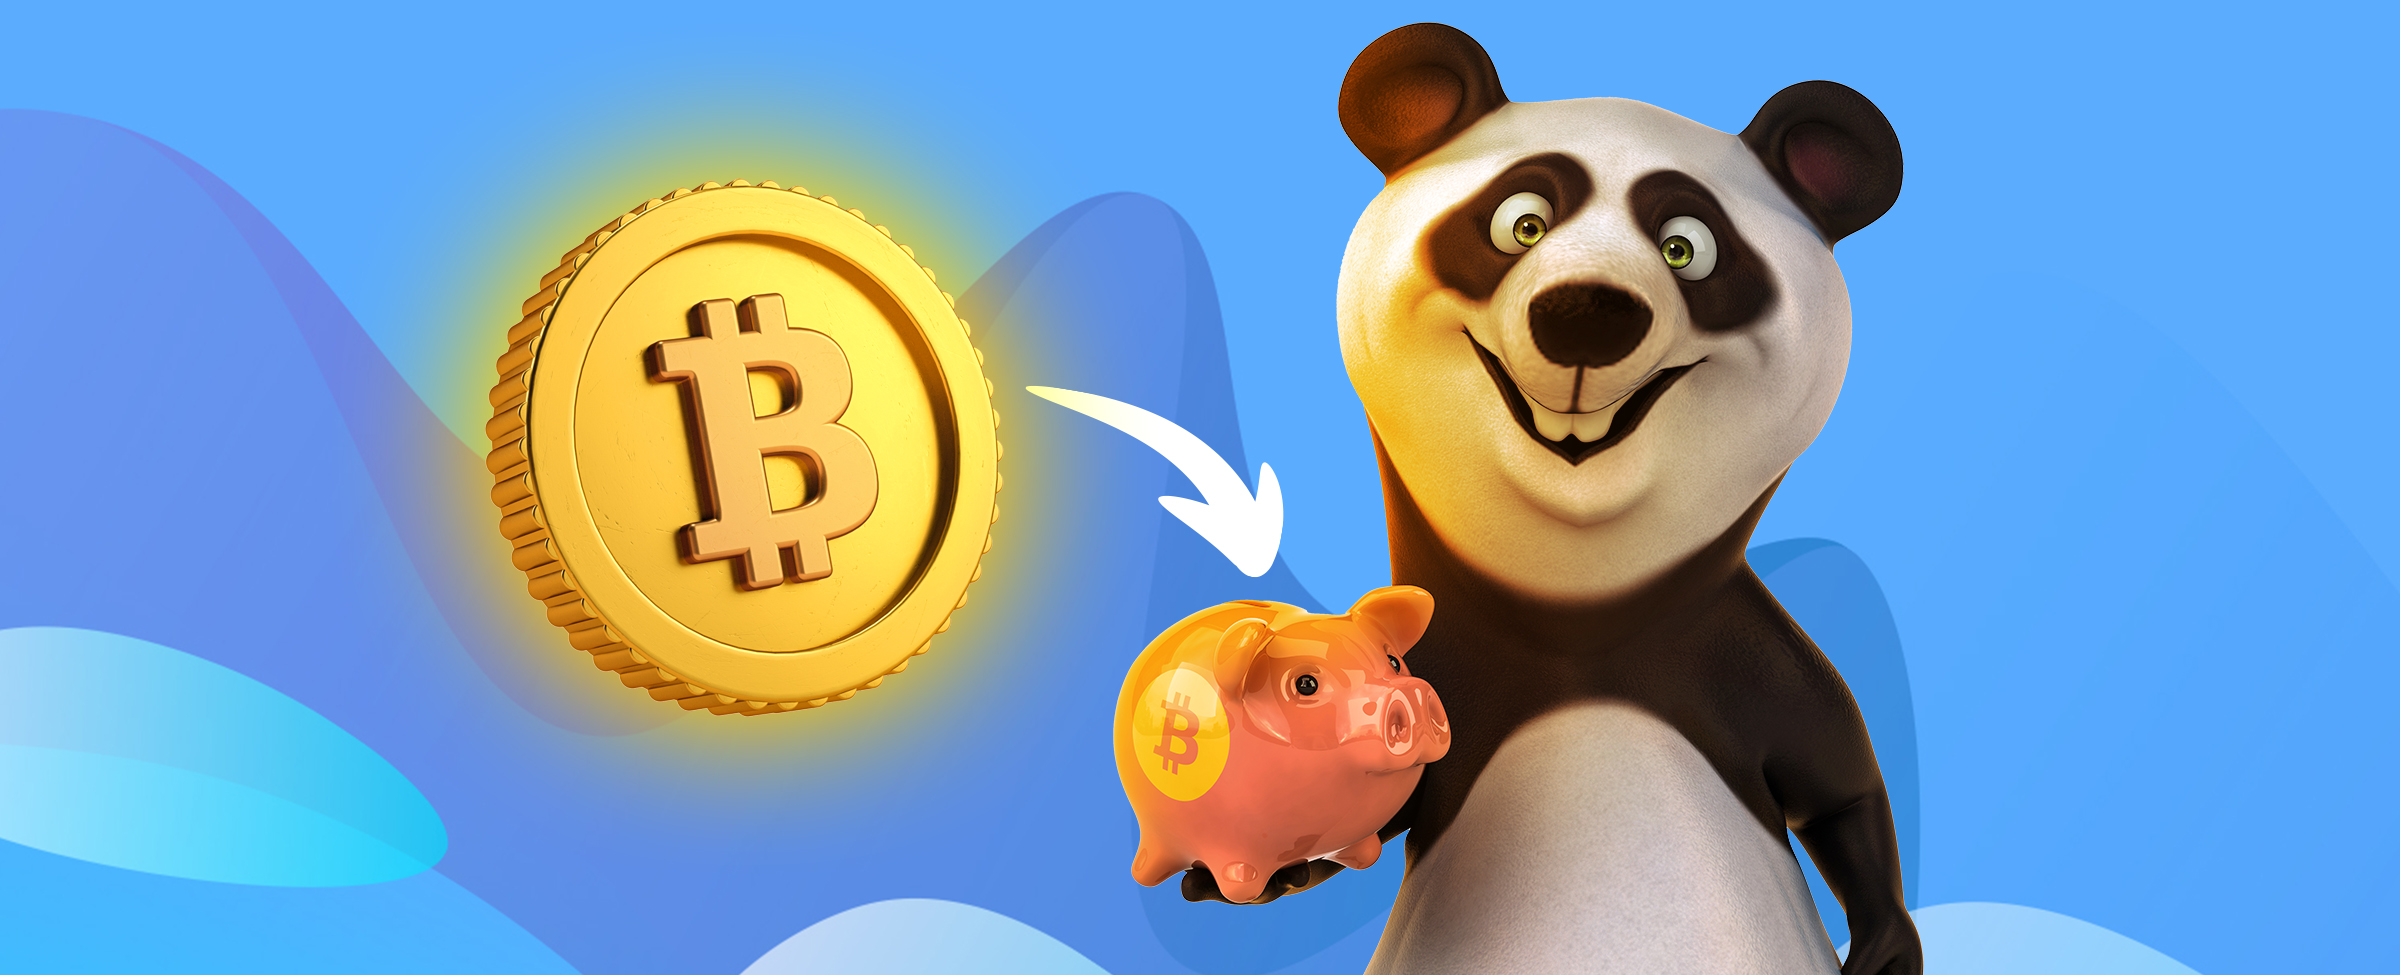 Panda cartoon character holding up a piggy bank while standing next to a giant levitating bitcoin, to explain crypto casino deposits